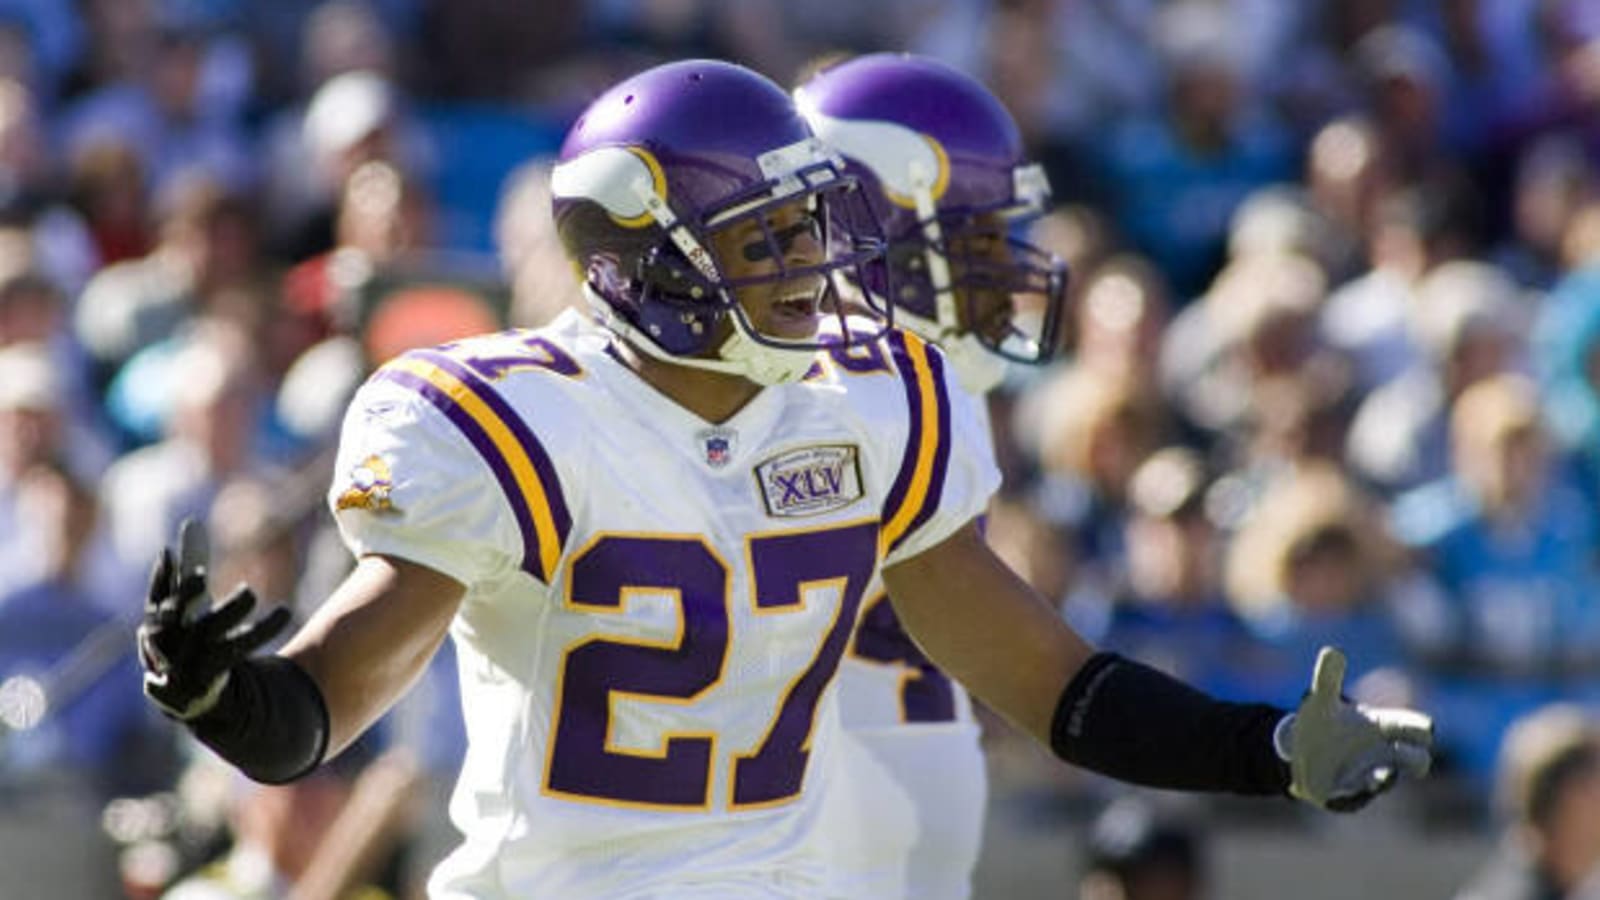 Two former Vikings cornerbacks have been arrested this week